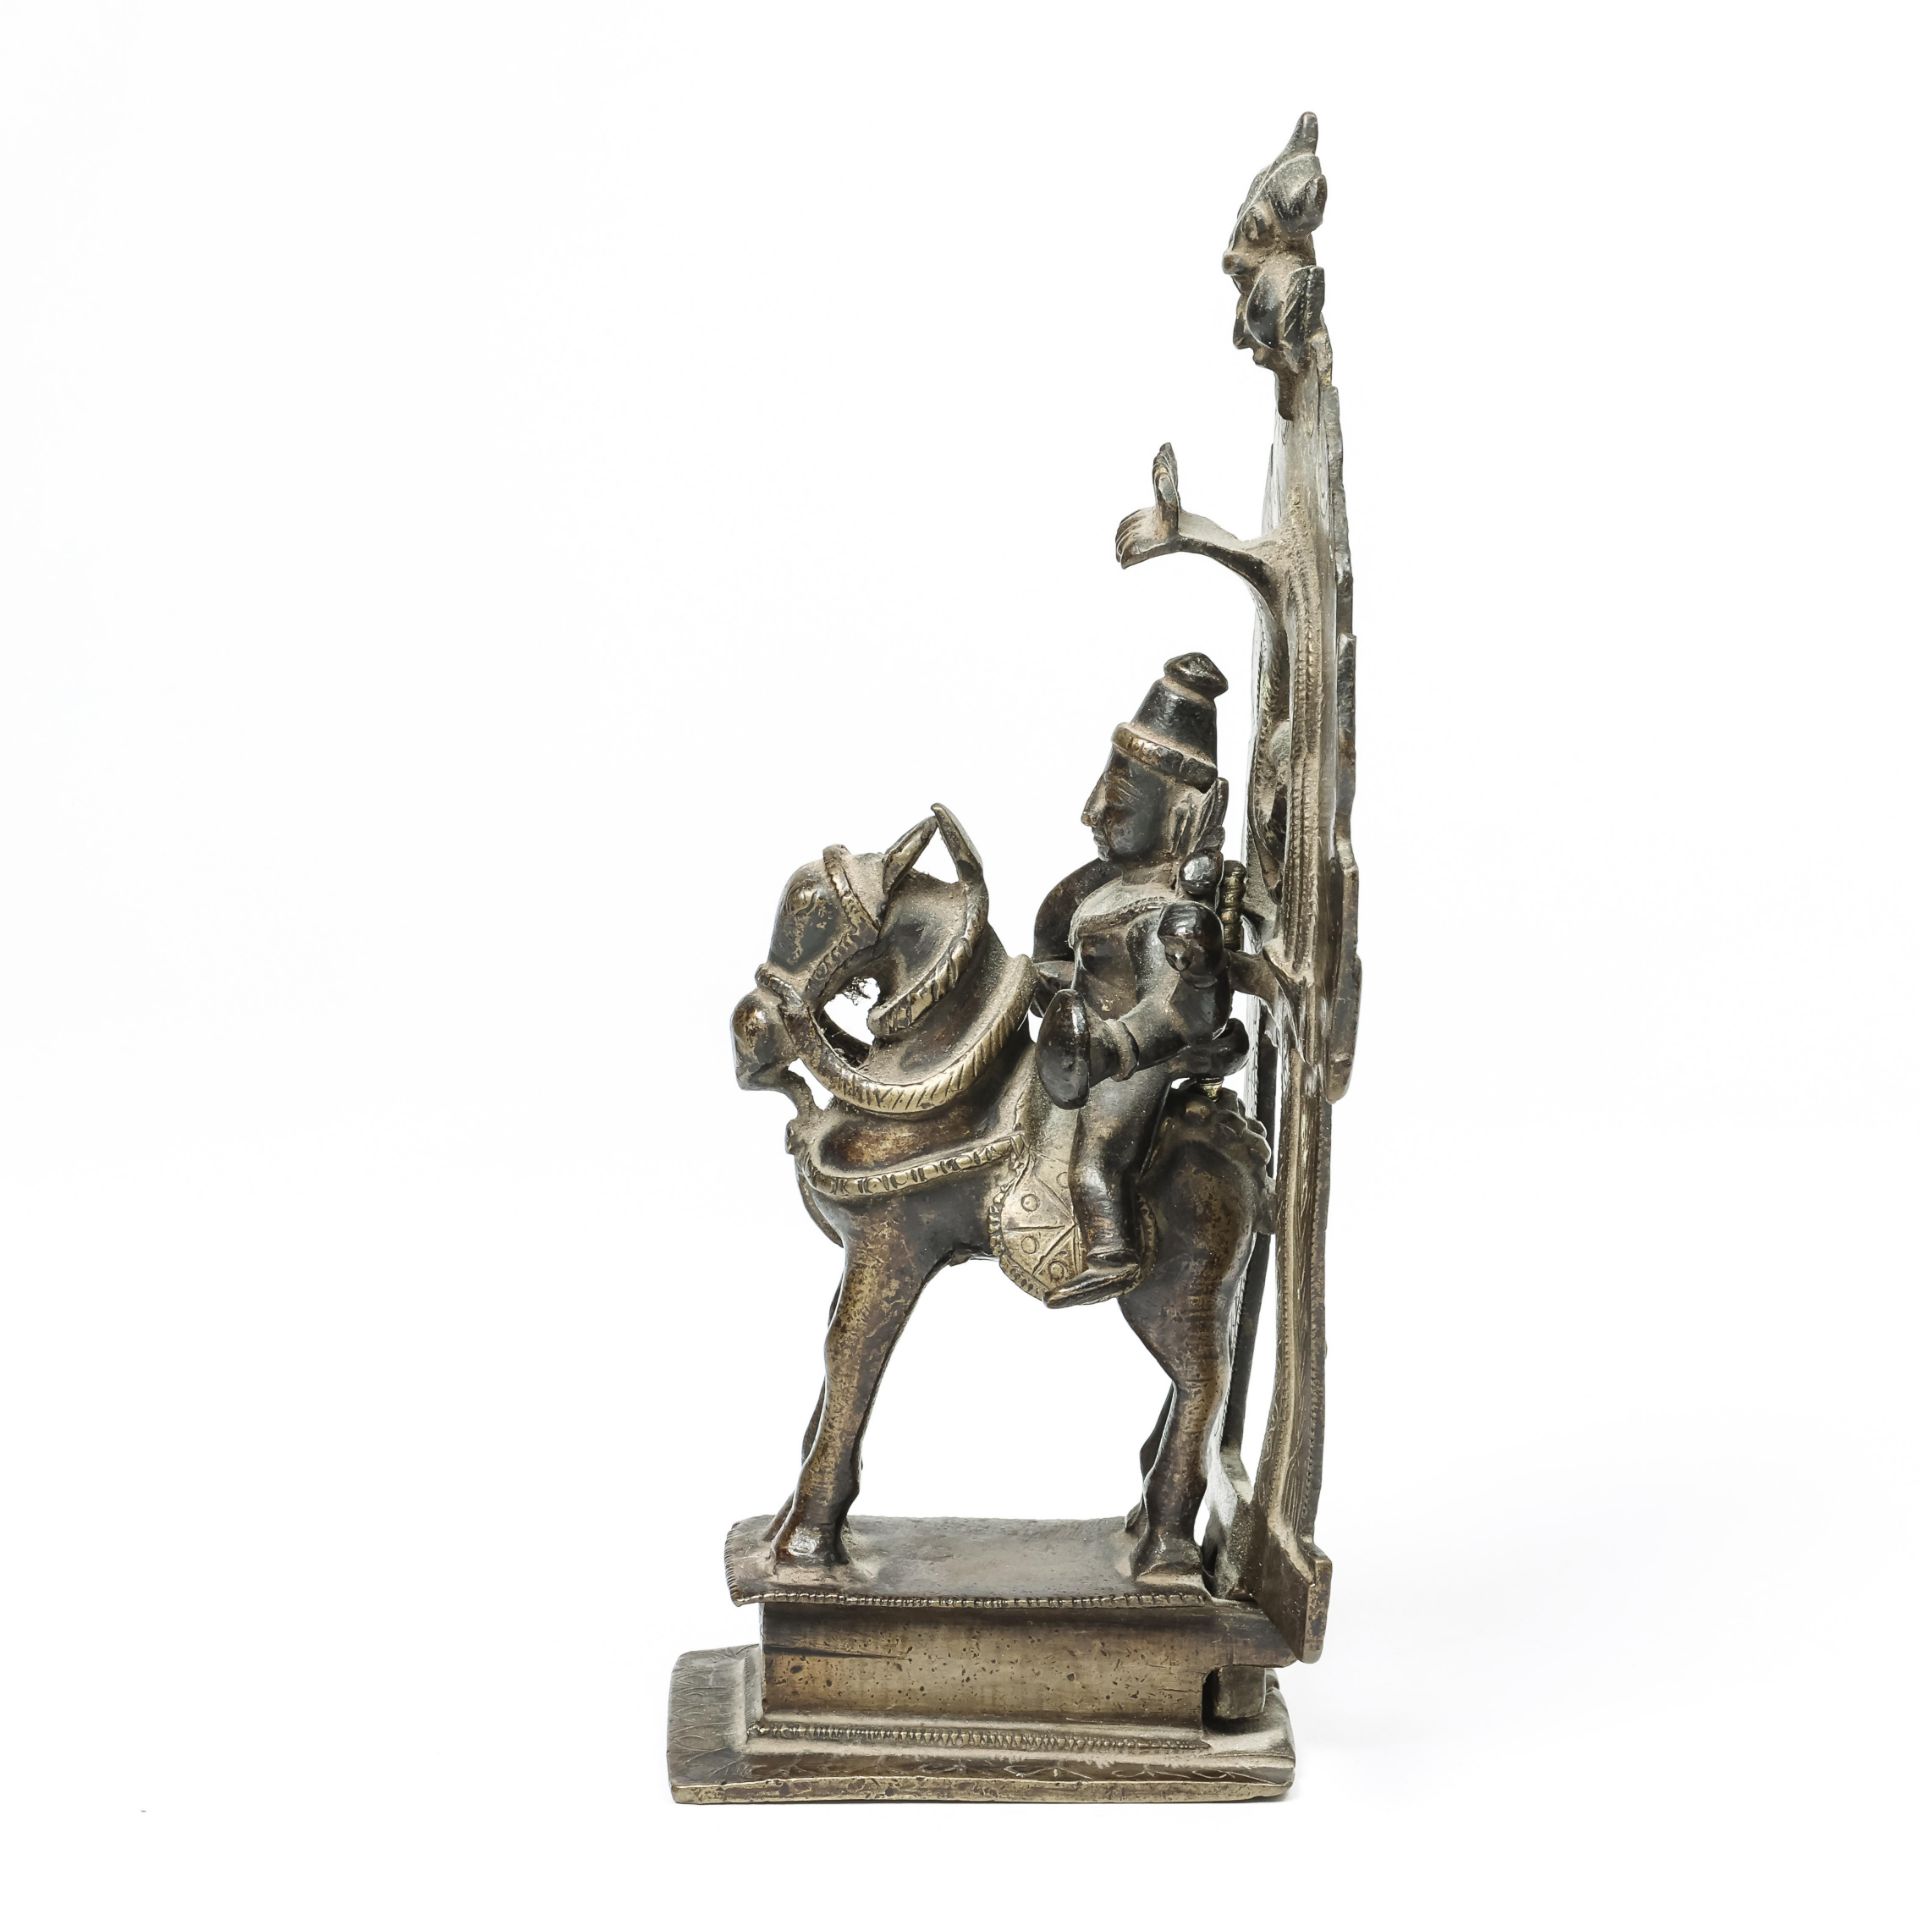 North-India, a bronze altar figure of Durga on a horse, 19th century; - Image 2 of 5